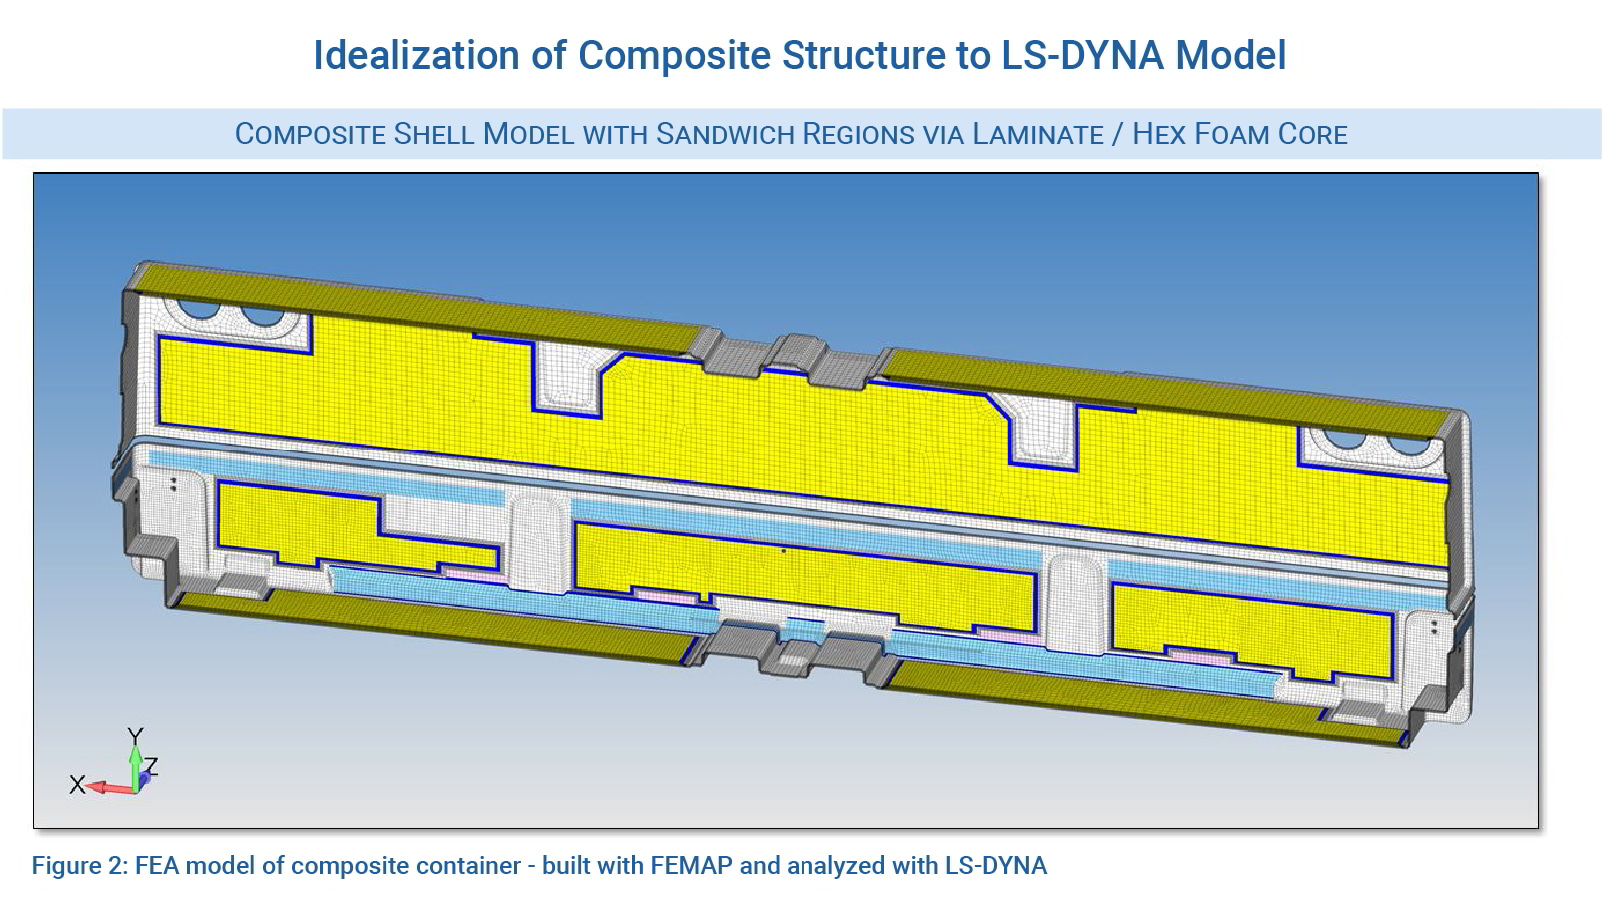 Figure 2 - FEA model of composite container – built with FEMAP and analyzed with LS-DYNA 